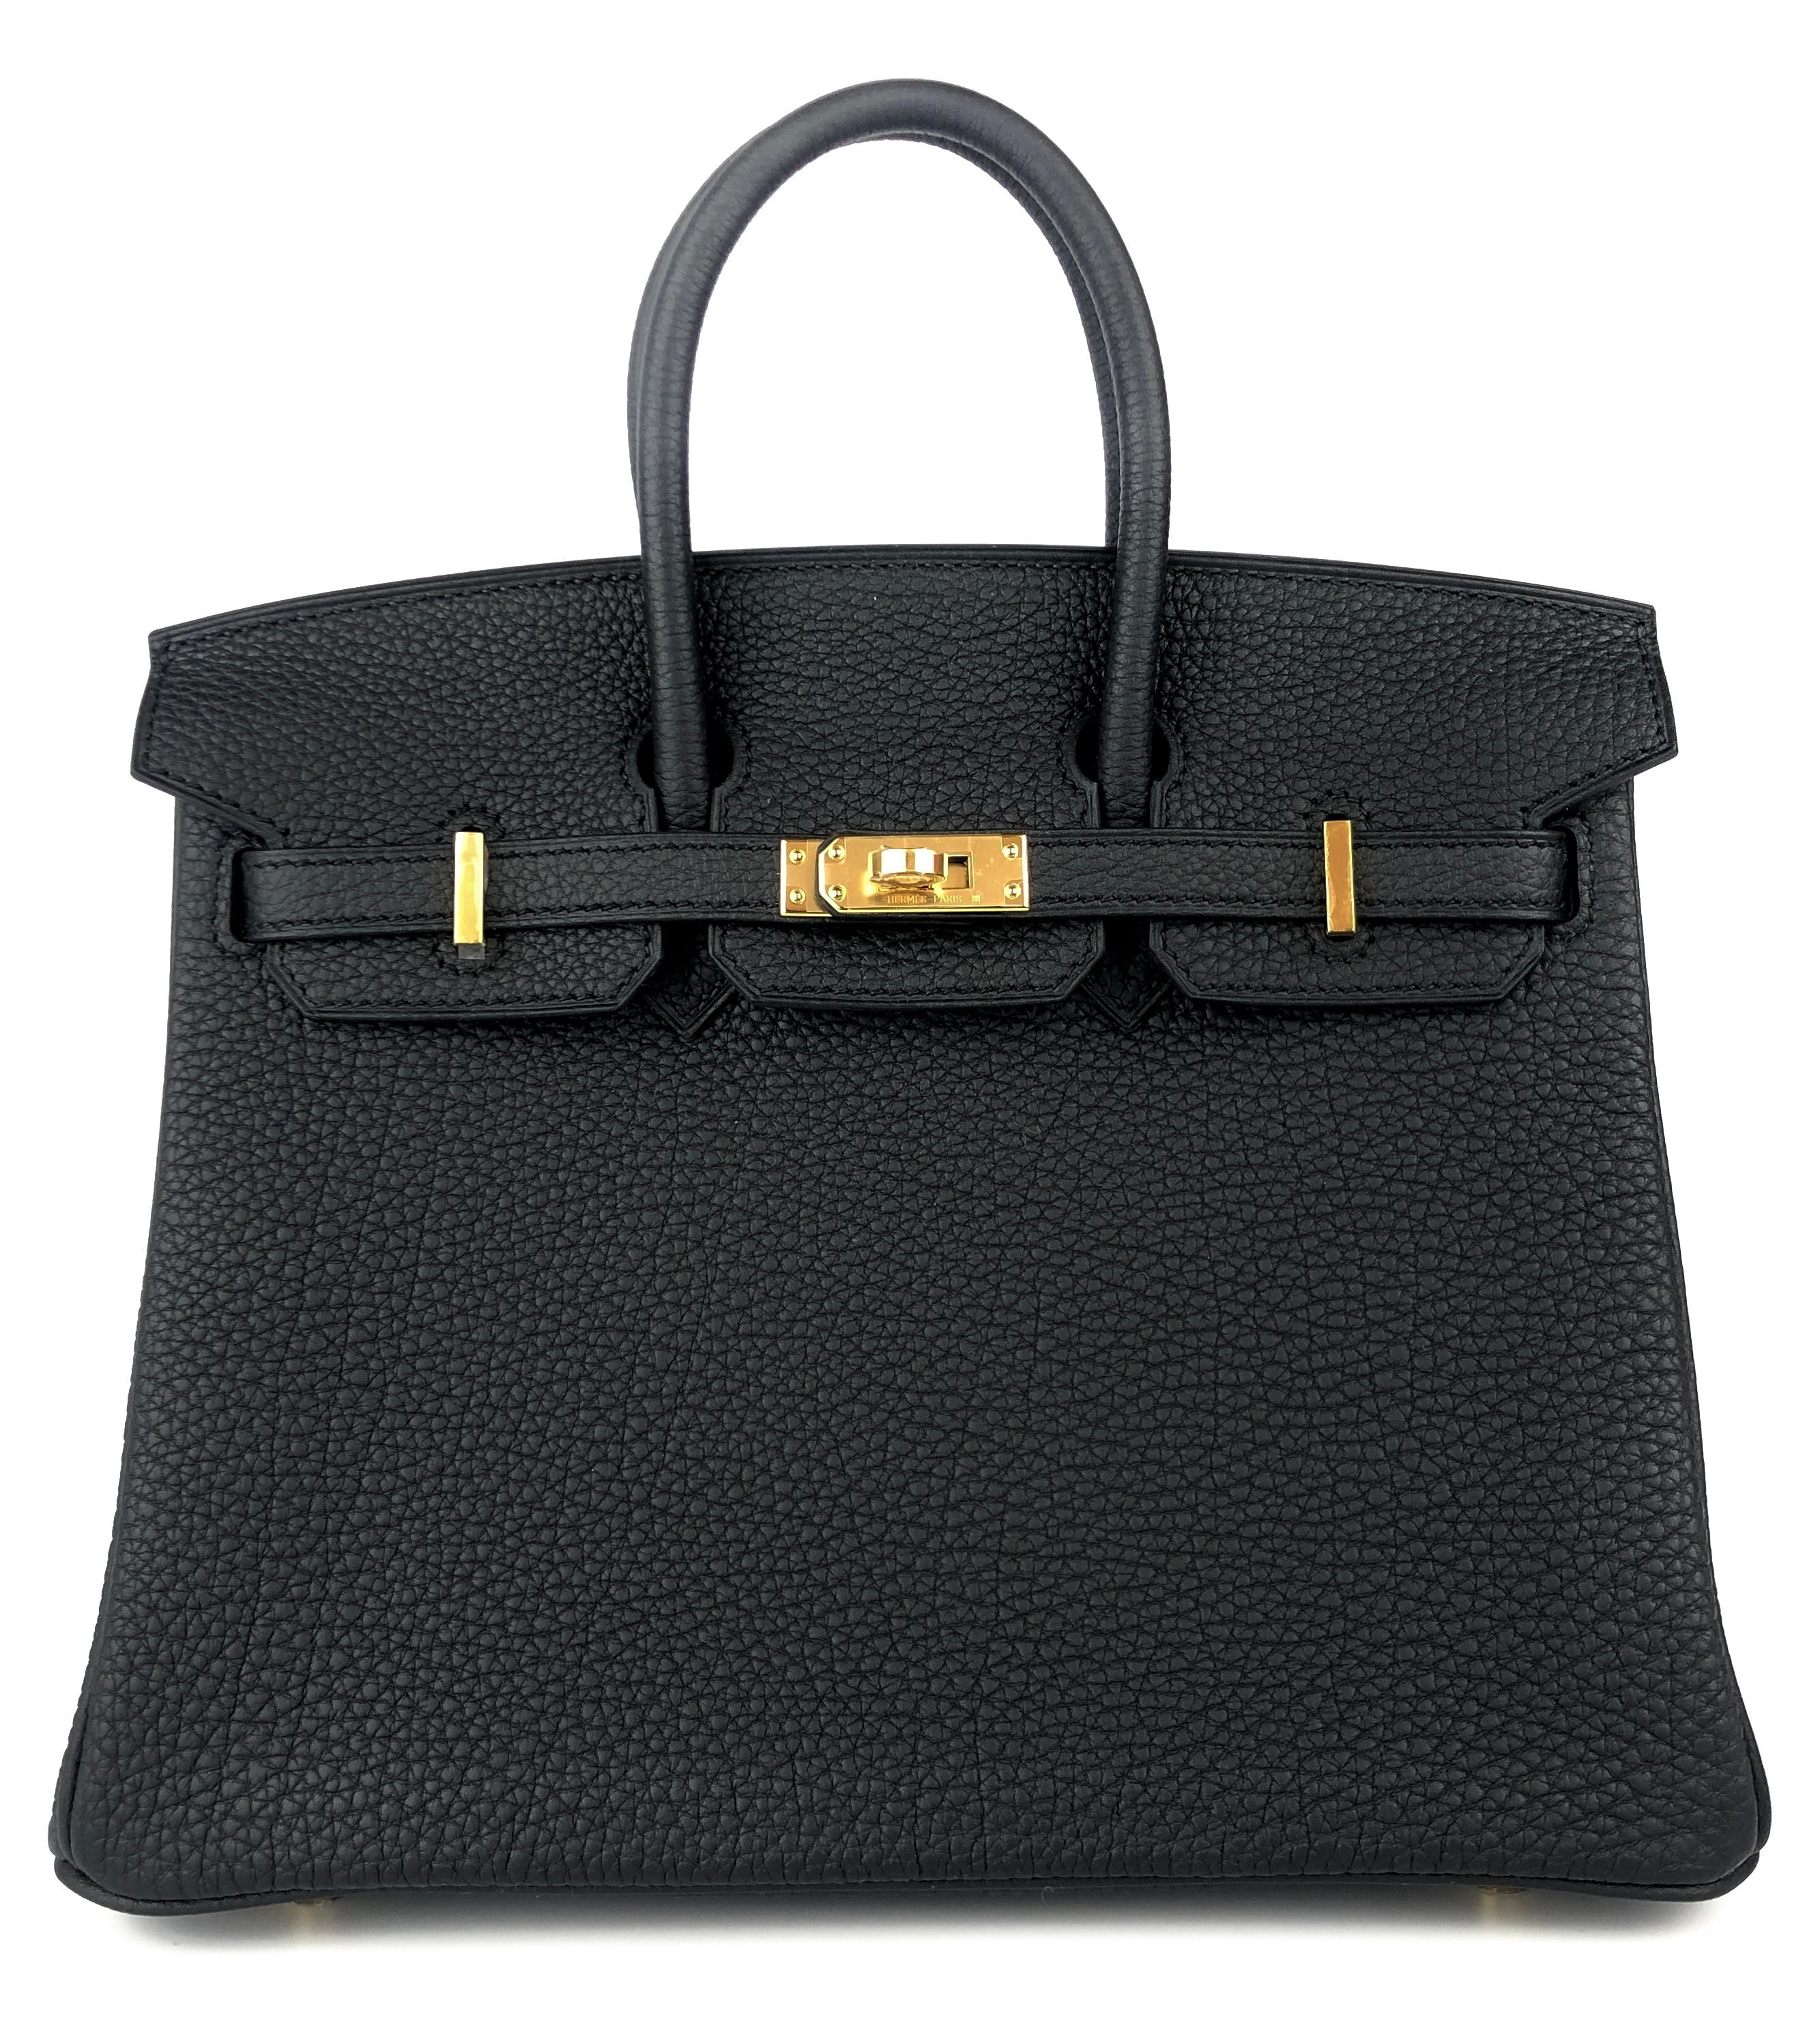 Classic Absolutely Stunning New Rare Hermès Birkin 25 Black Noir Togo Leather Gold Hardware. U Stamp 2022. 
One of the most coveted hardest combinations to get! Includes all accessories and Box. 

Shop with Confidence from Lux Addicts. Authenticity